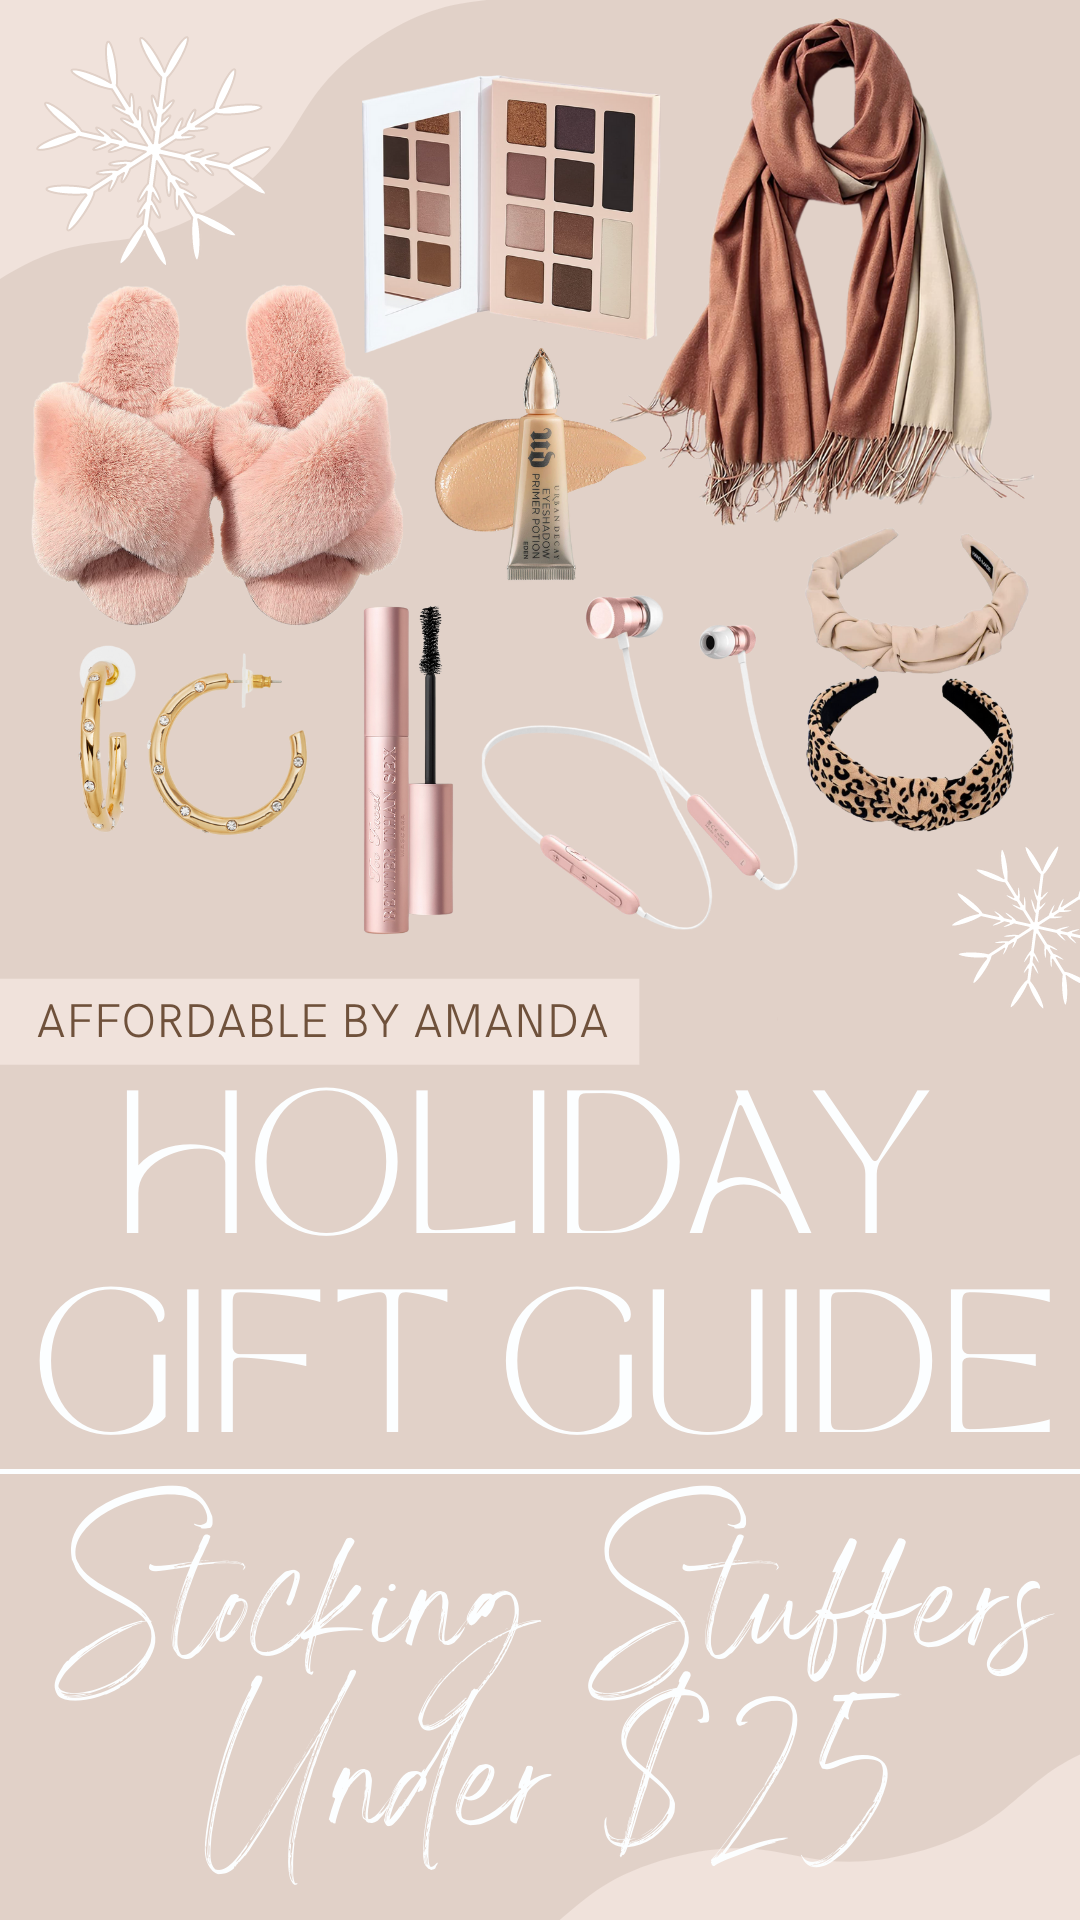 2021 Stocking Stuffer Gift Guide - Best Gifts Under $25